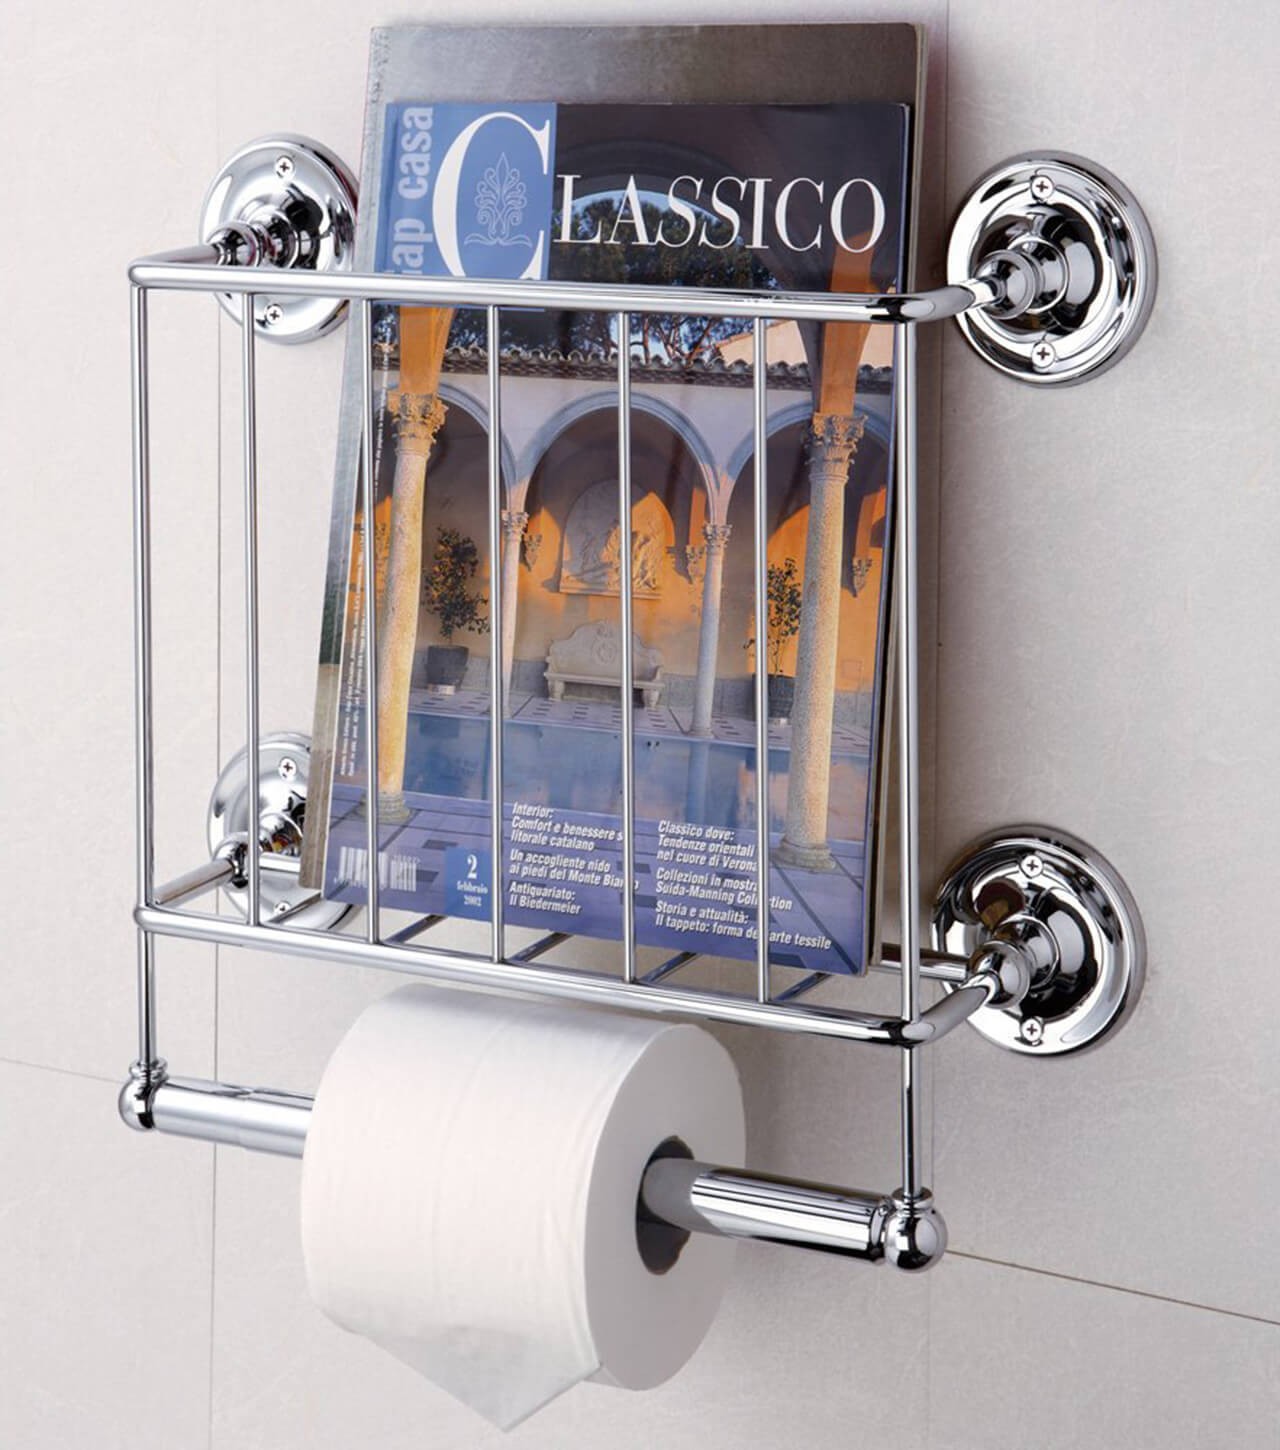 Toilet and More Newspaper Wall Mount Holder for Living Room Office Wall Mounted Magazine Rack,Magazine Rack Wall Mounted Metal Magazine Newspaper Holder Rack,Small Metal Magazine Holder for Bathroom 